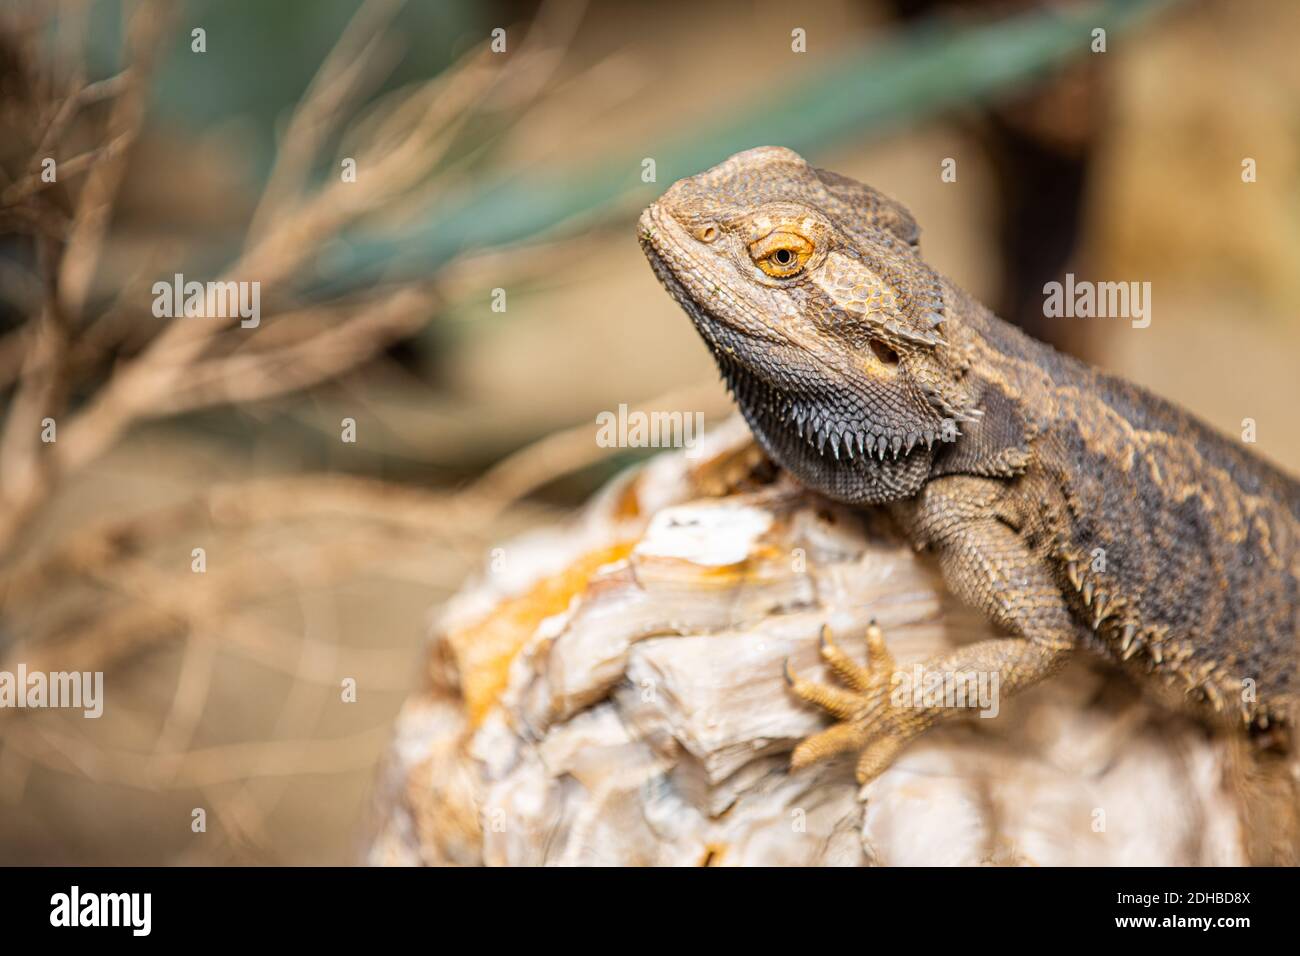 Agama Dragon Lizard. Indian garden lizard (Calotes versicolor) on rocks with natural sunlight, reptile hunting for insects. Animal wildlife portrait Stock Photo